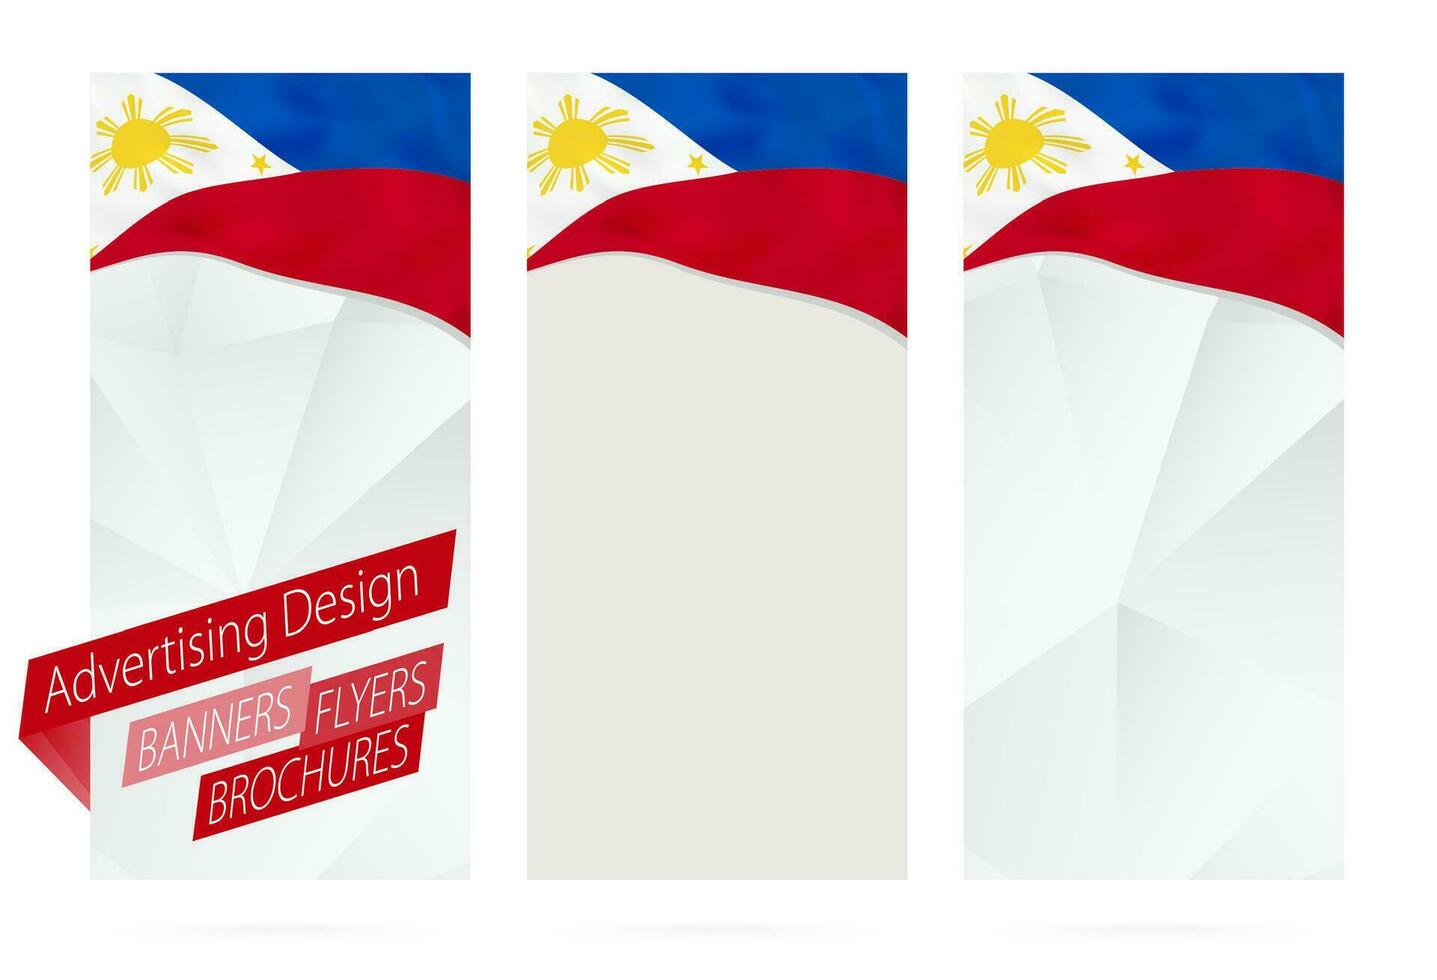 Design of banners, flyers, brochures with flag of Philippines. vector